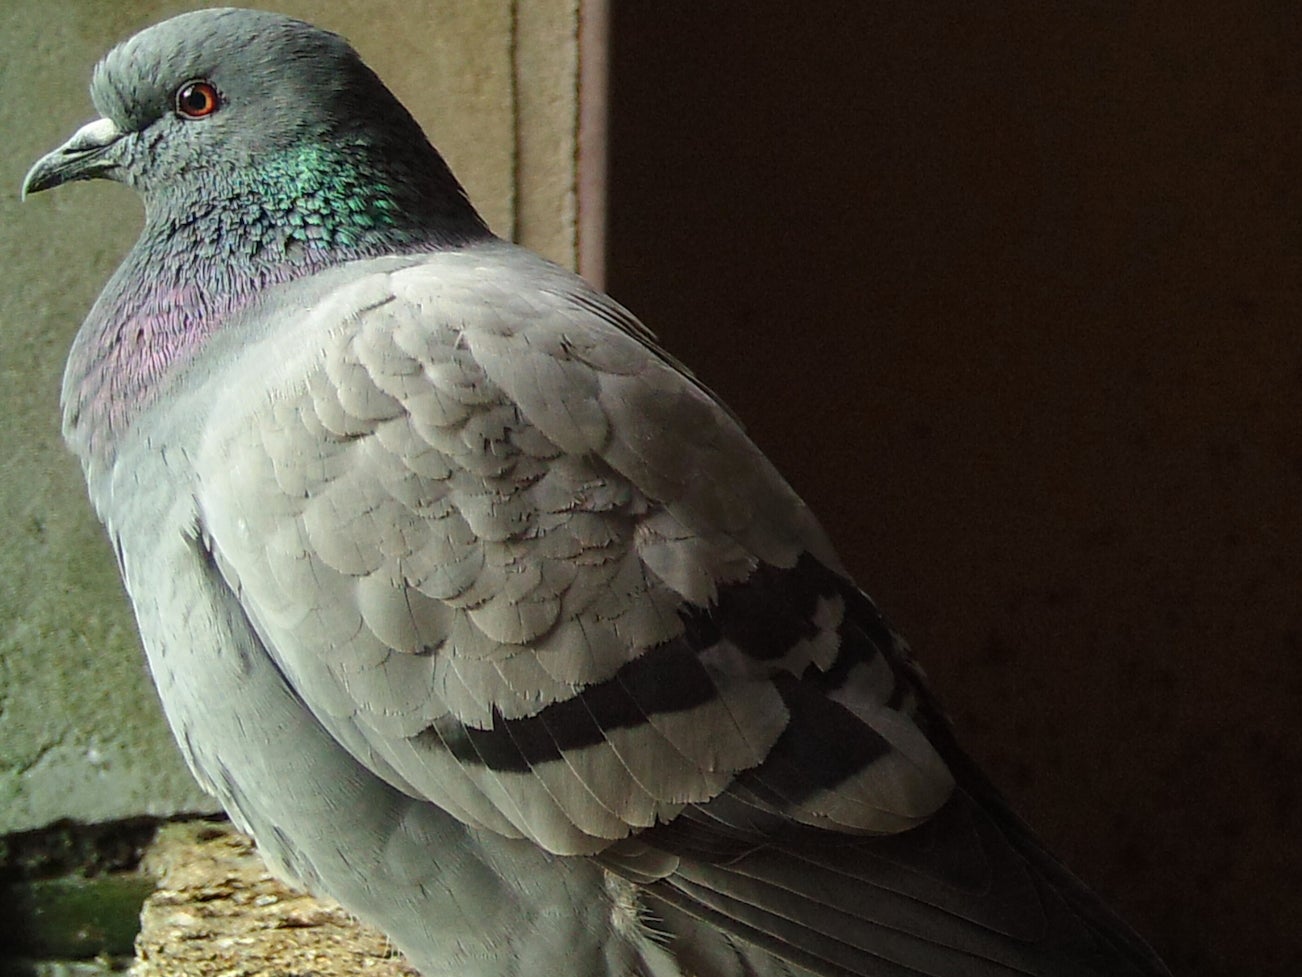 It may closely resemble a pigeon, but this is a photograph of the elusive rock dove – ancestor to modern feral pigeons